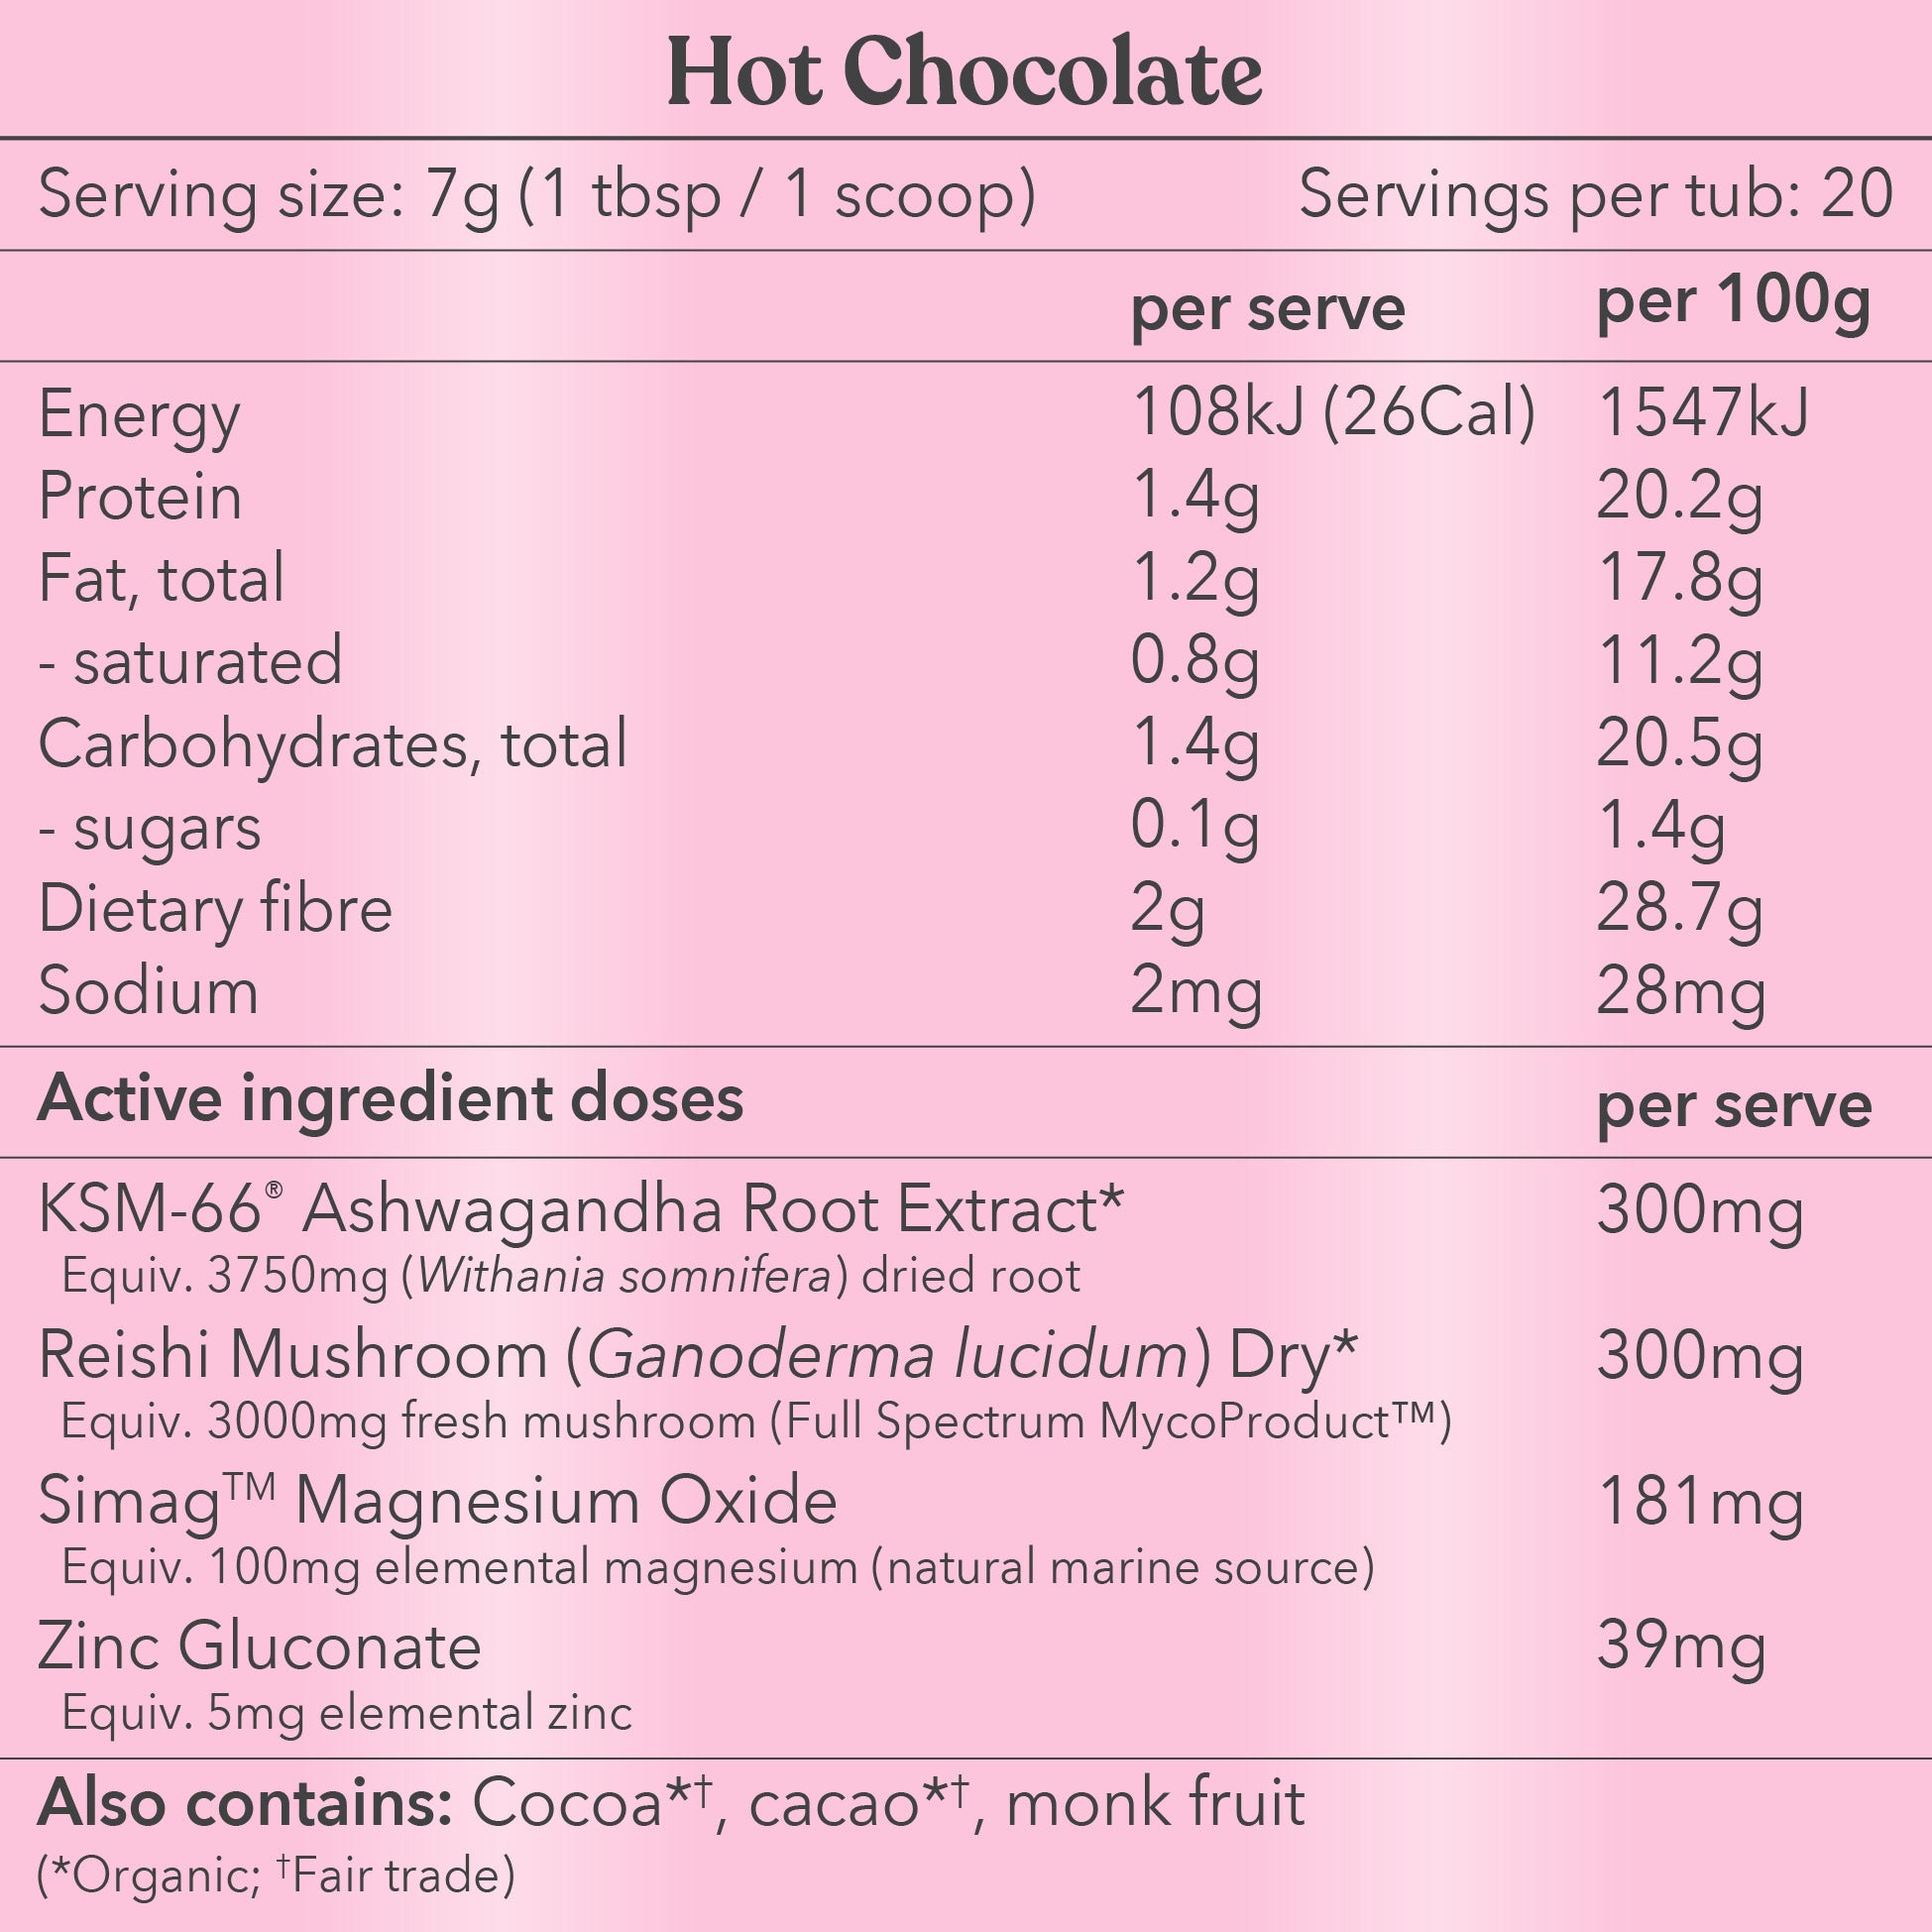 Hot Chocolate Nutritional Information